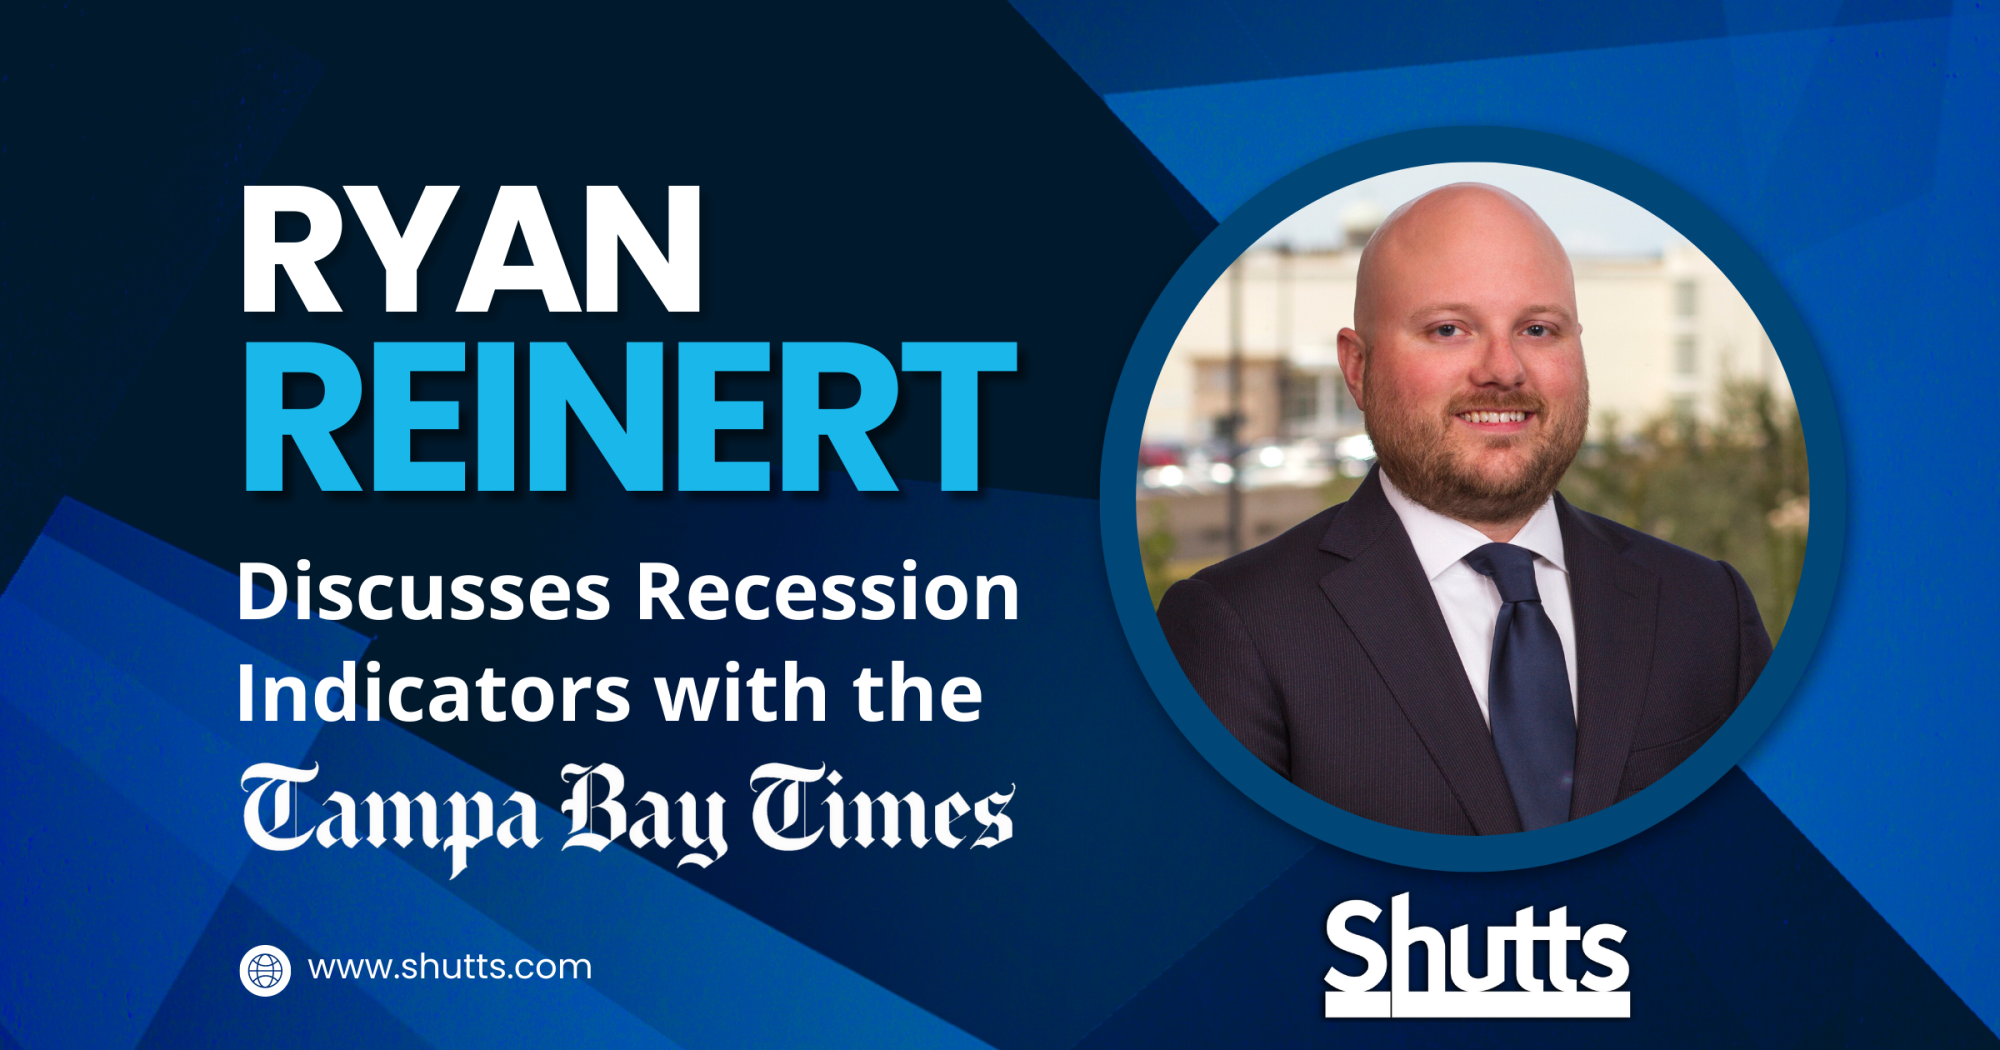 Ryan Reinert Discusses Recession Indicators with the Tampa Bay Times